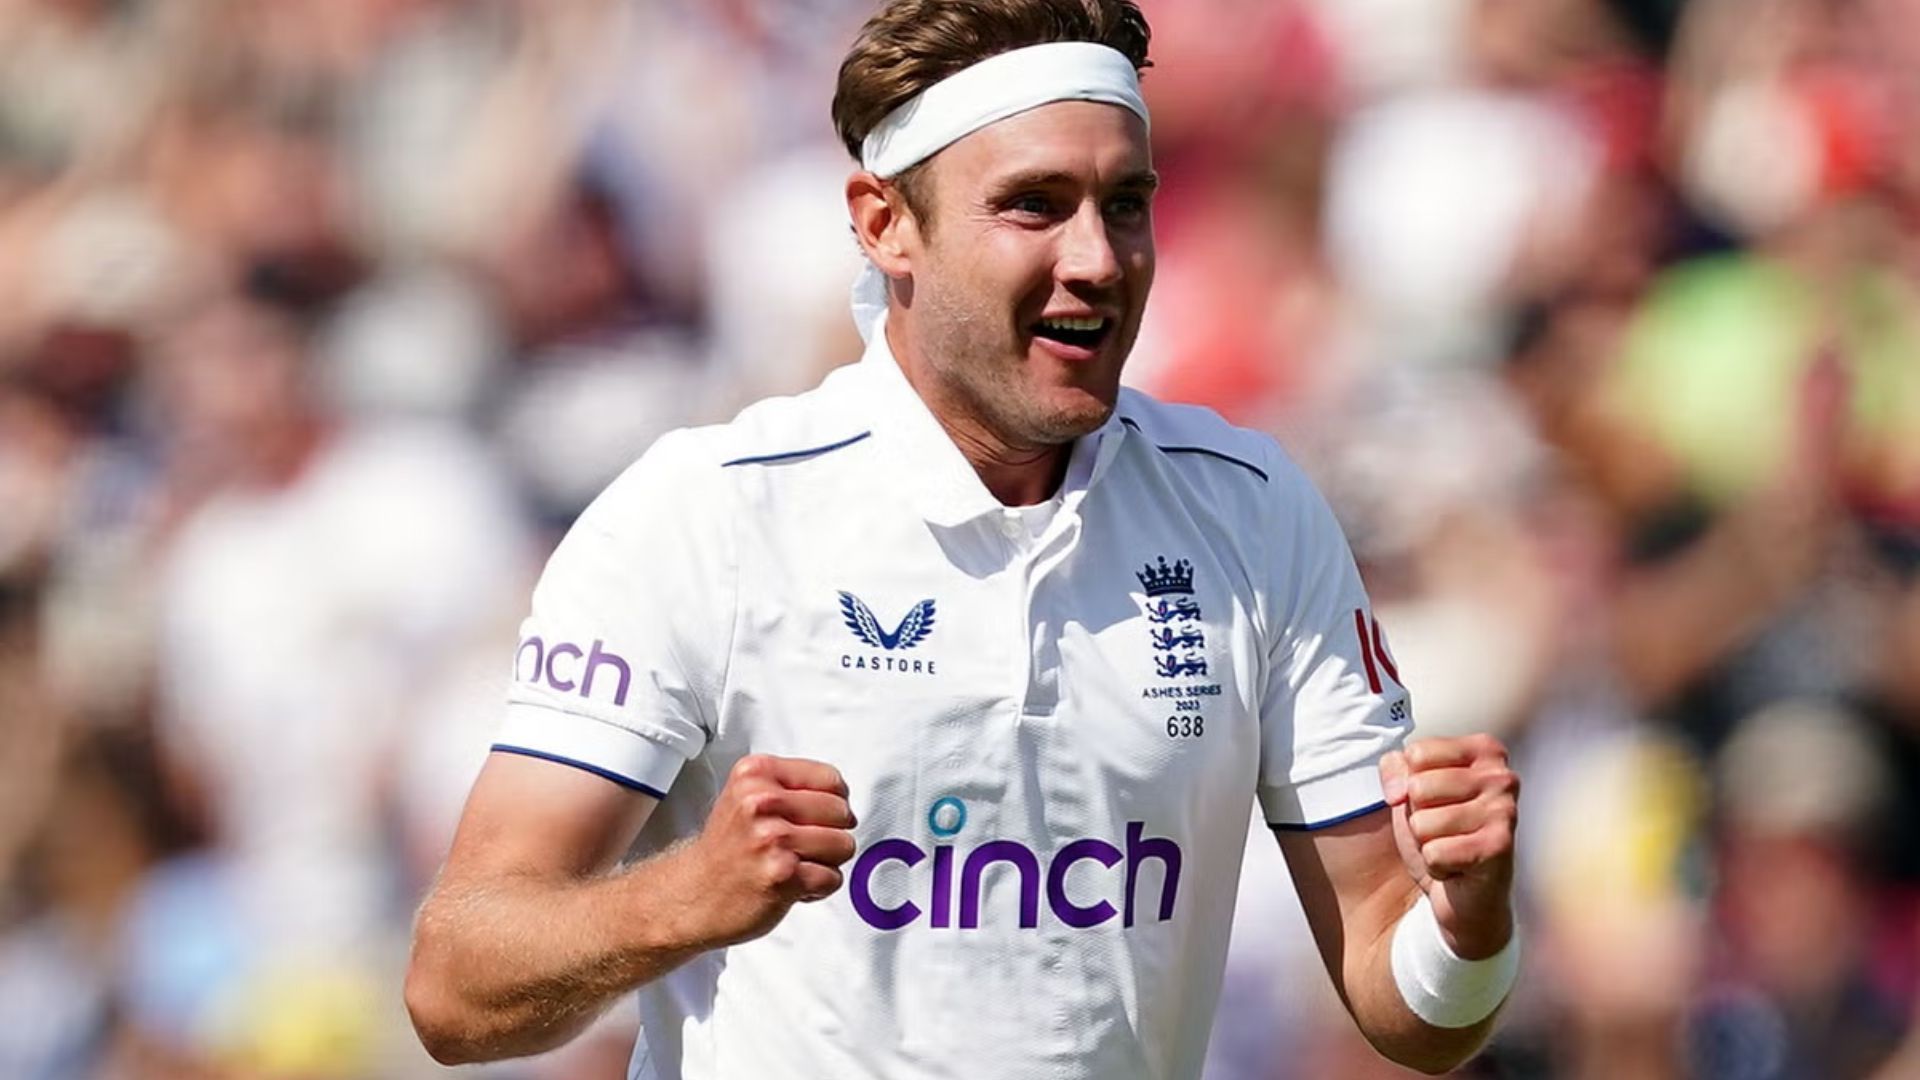 Stuart Broad is unarguably one of the best Test match bowlers in the world. 